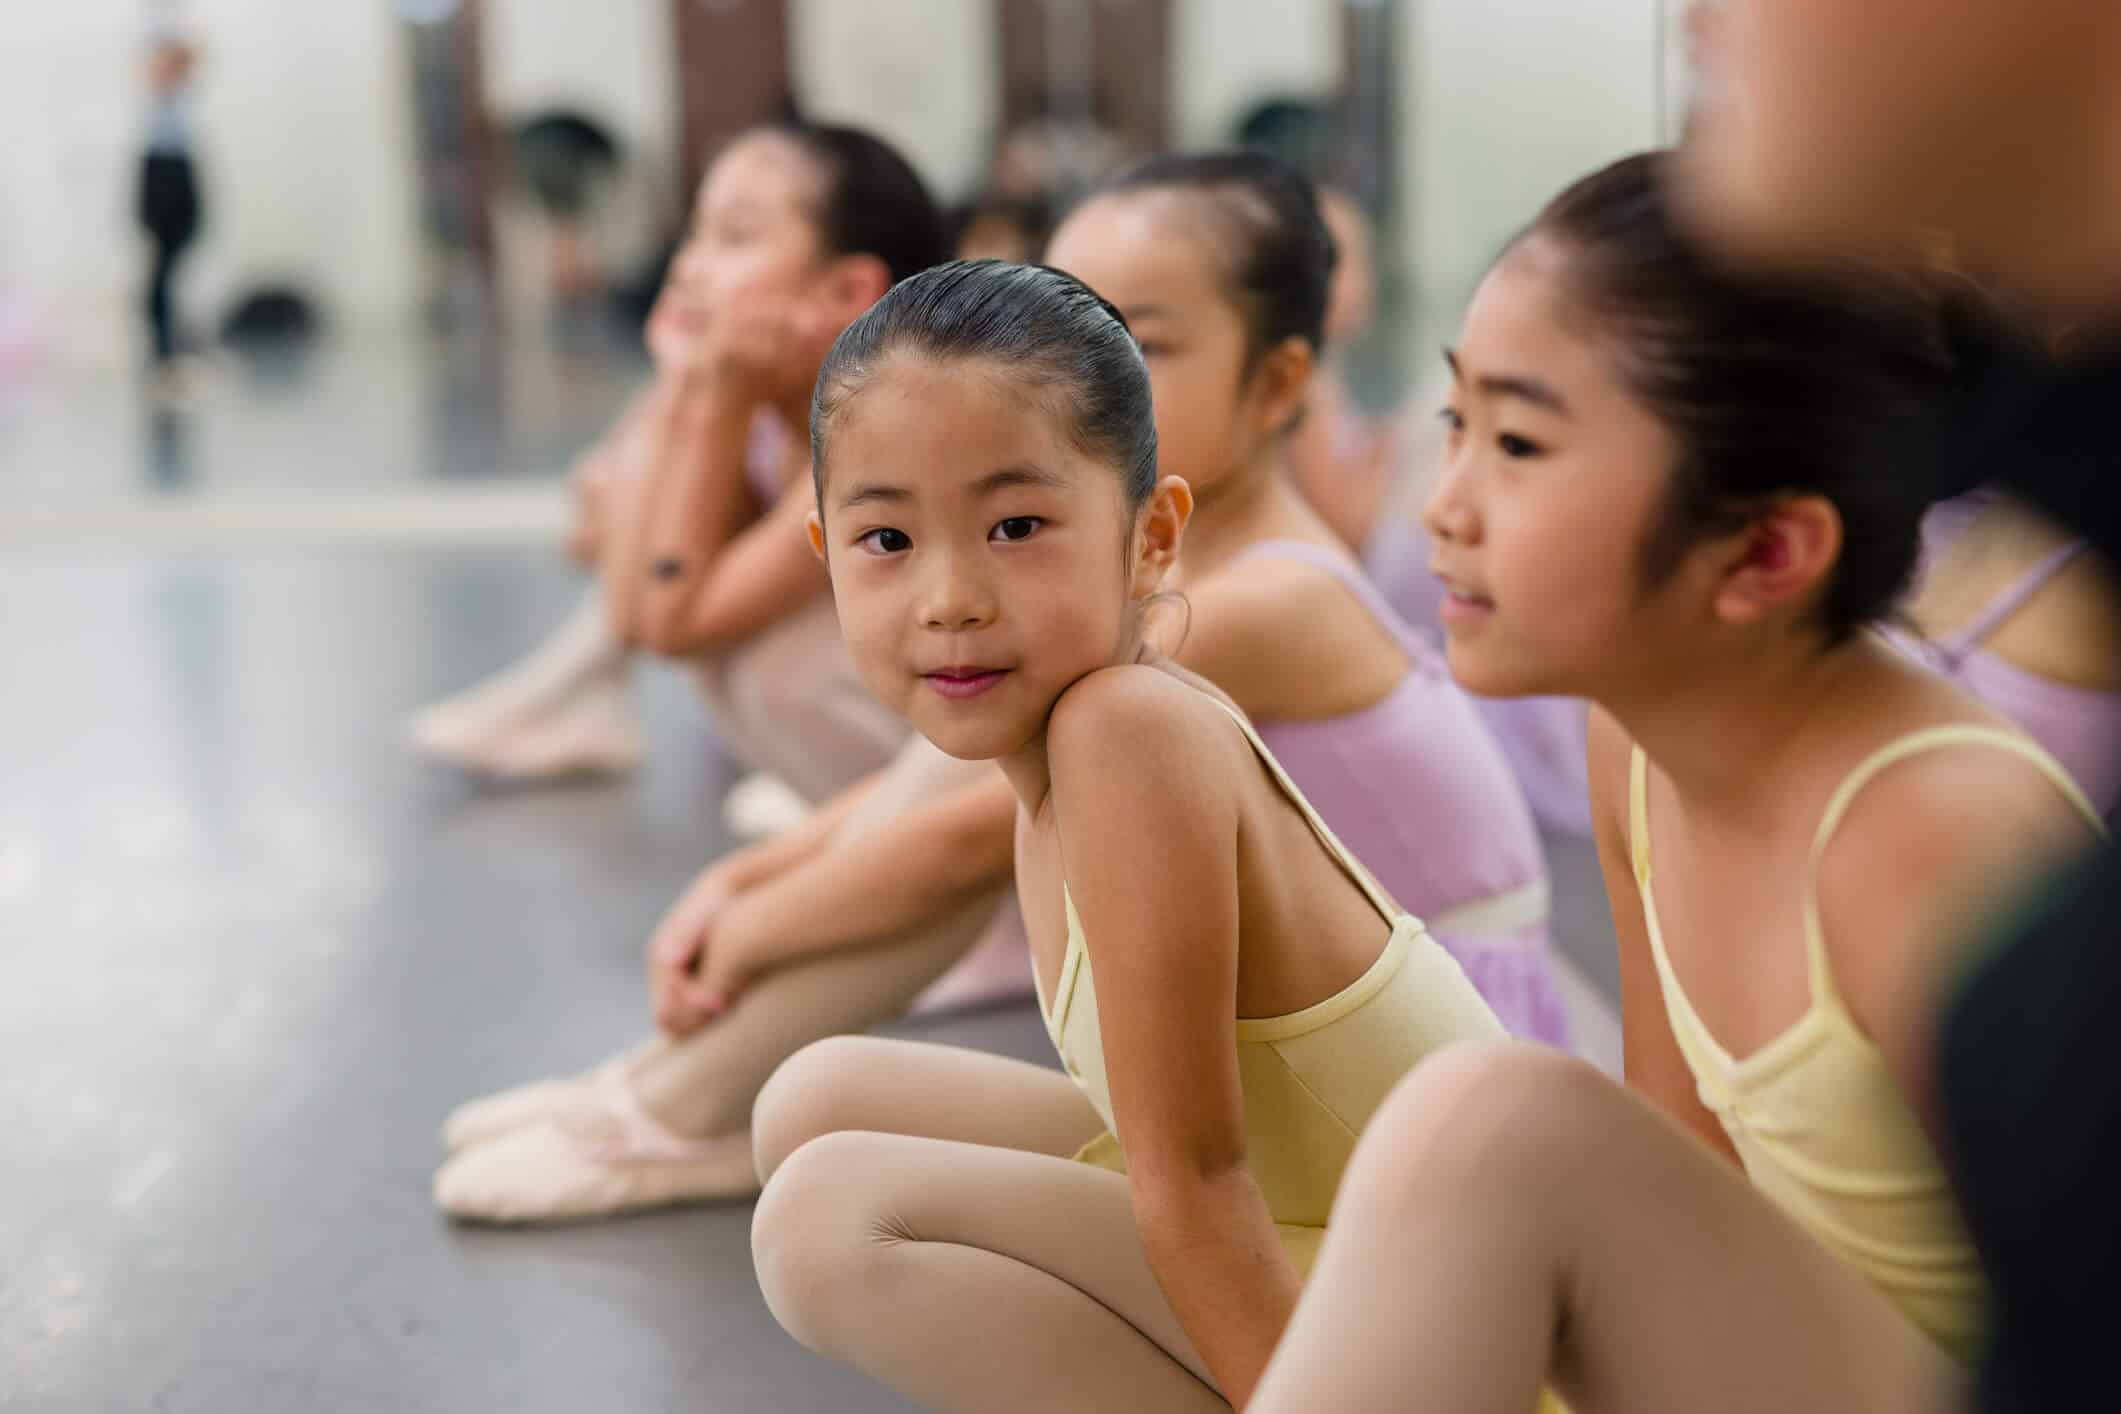 A group of young girls wearing yellow and purple ballerina dresses sitting happily on the floor